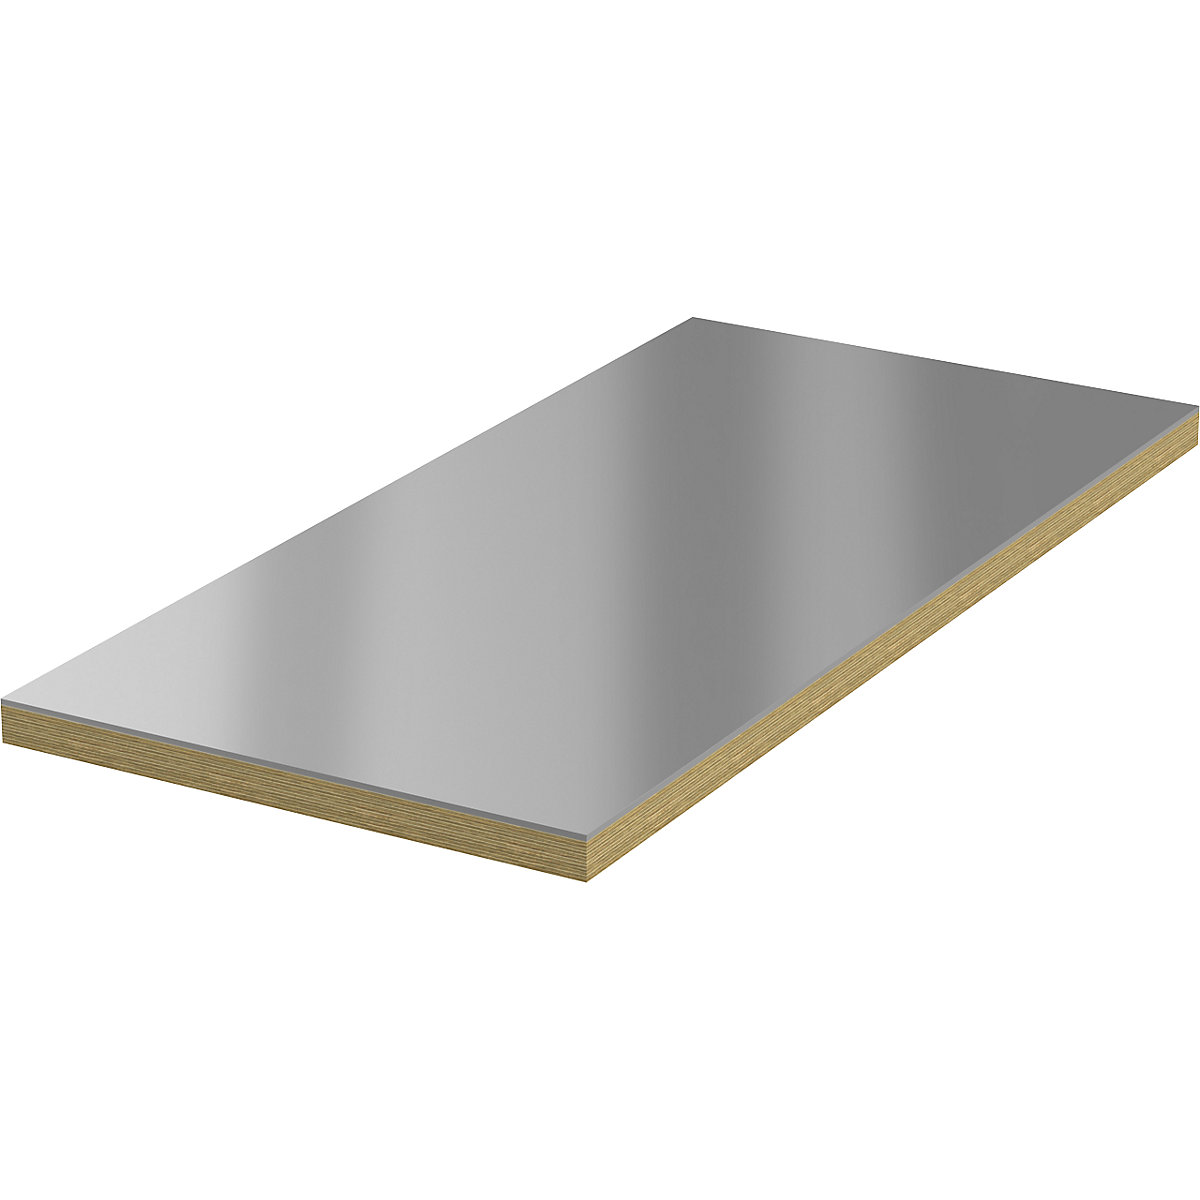 Sheet steel support for workbench tops, worktop width 1685 mm, 10 mm thick-1